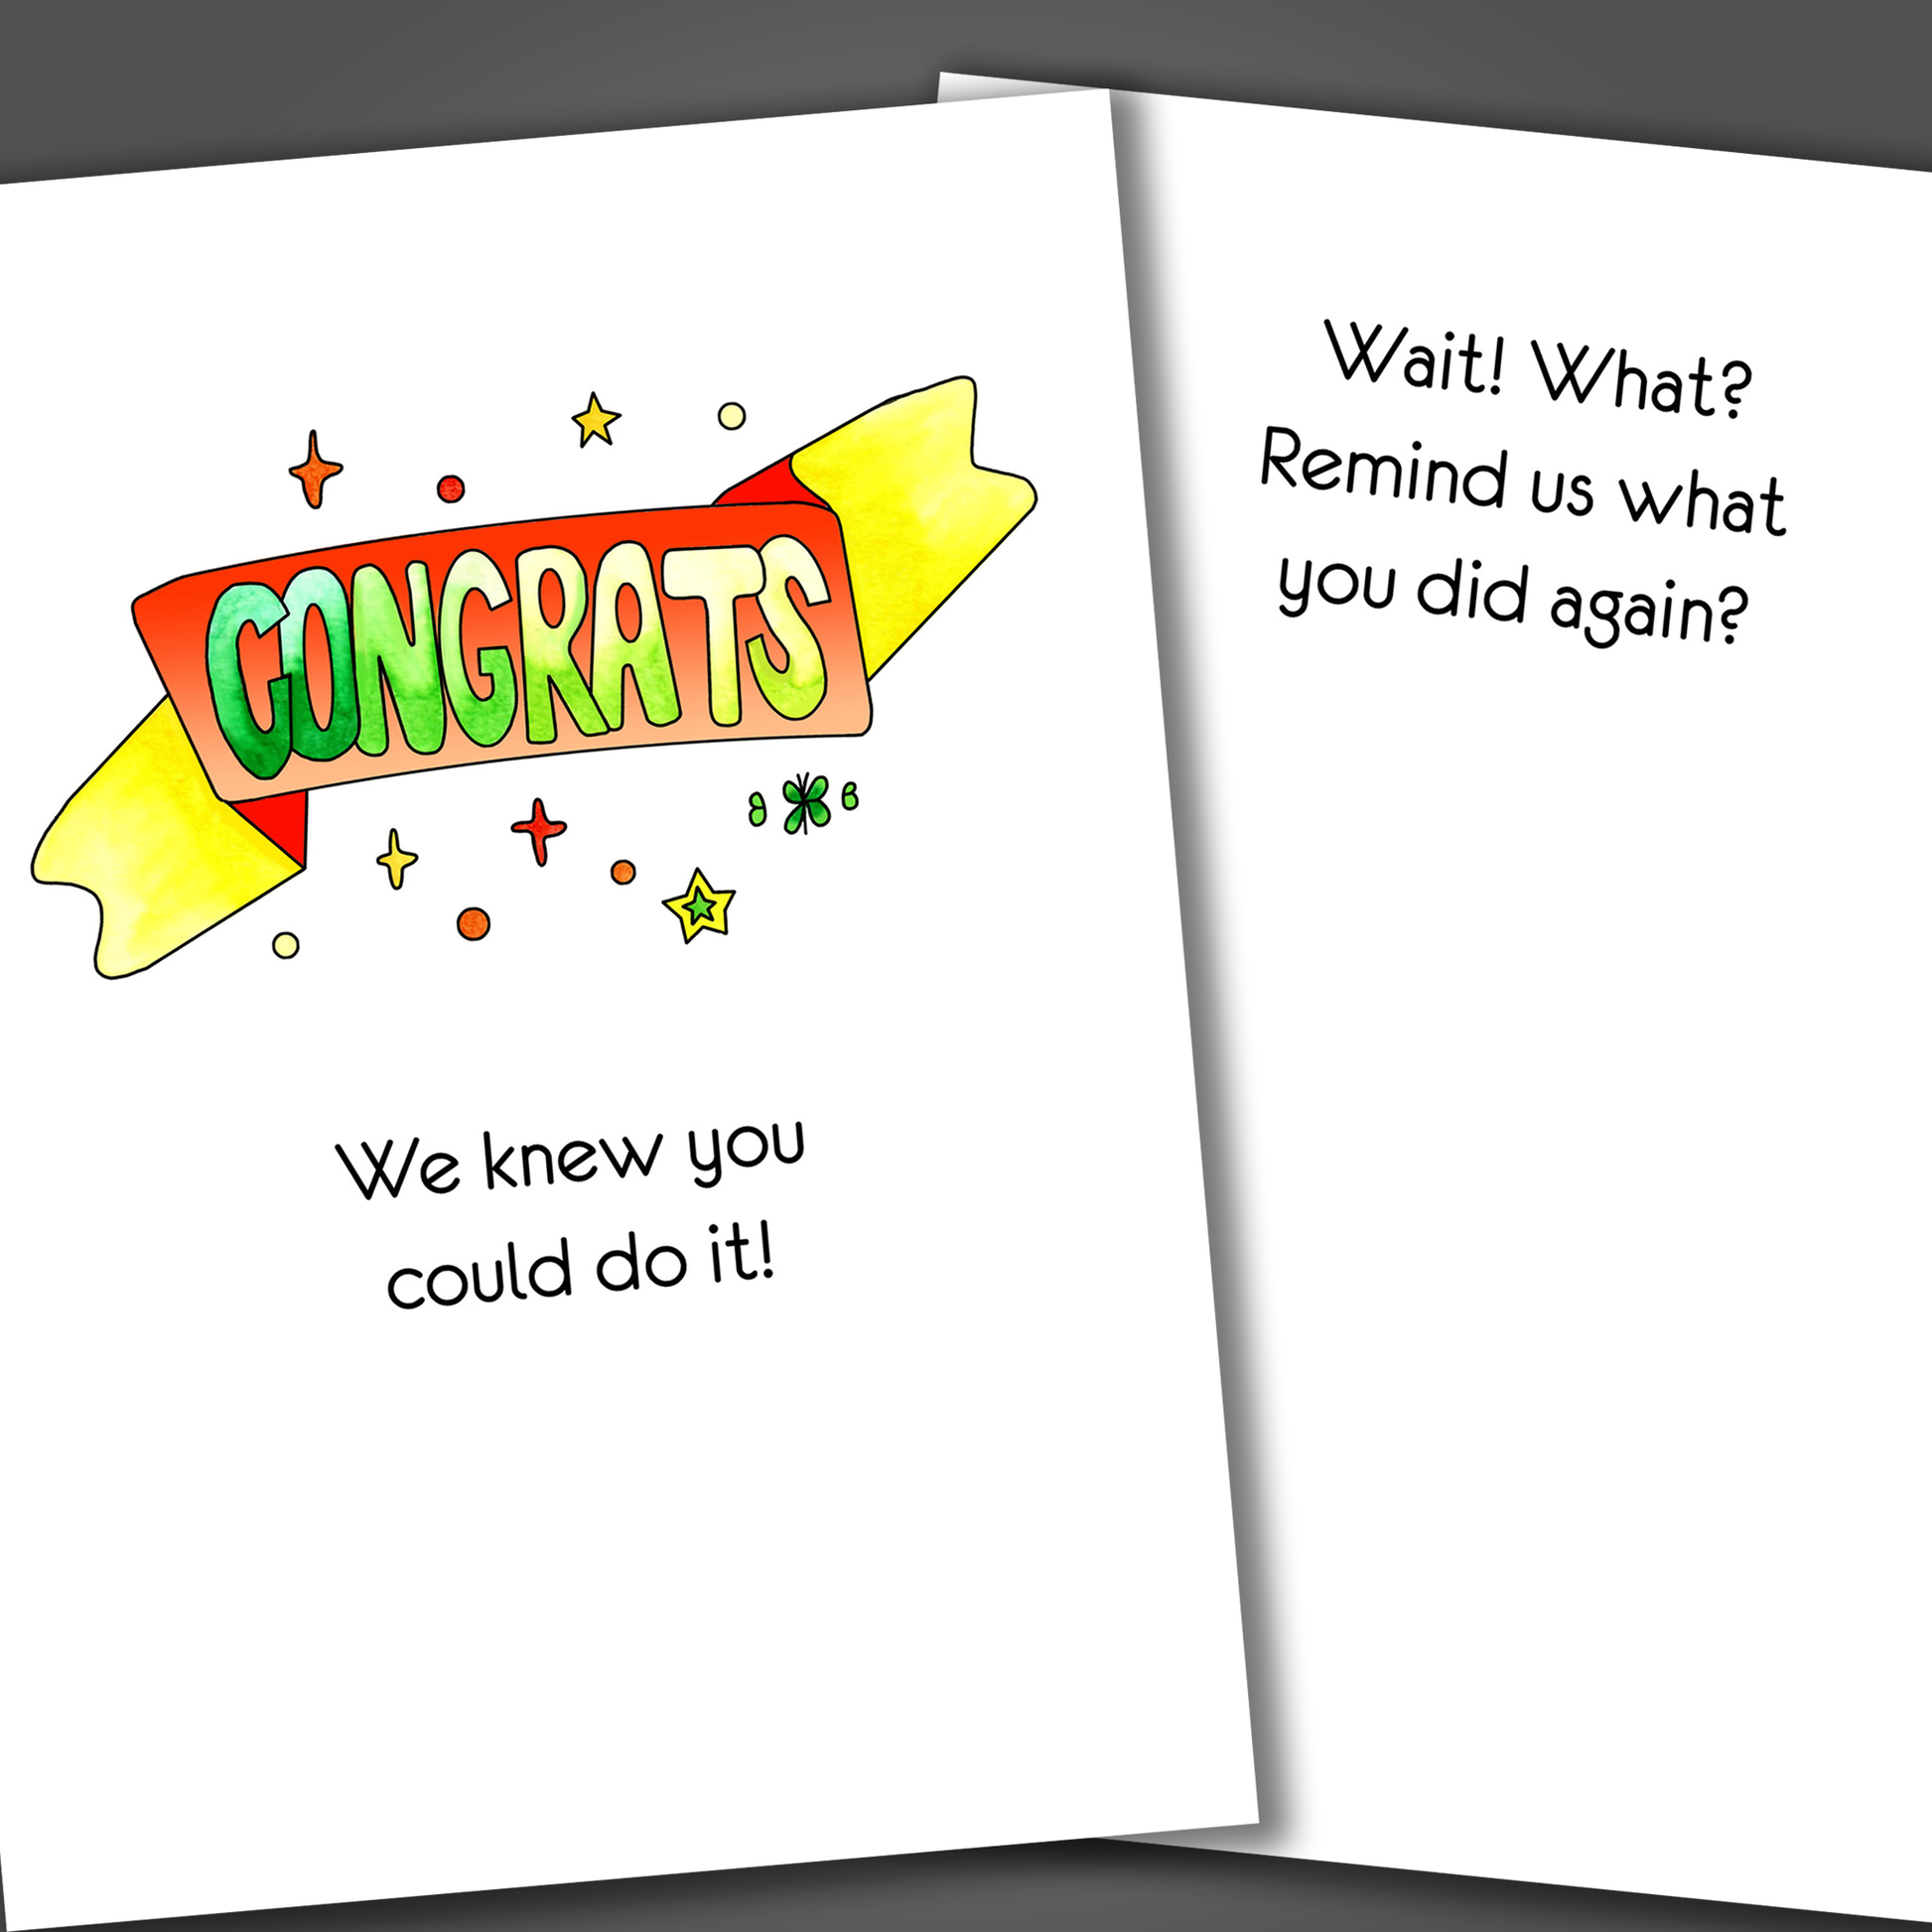 Funny congratulations card with the word congrats dawn in green letters on the front of the card. Inside of the card is a joke that says remind us what you did again?